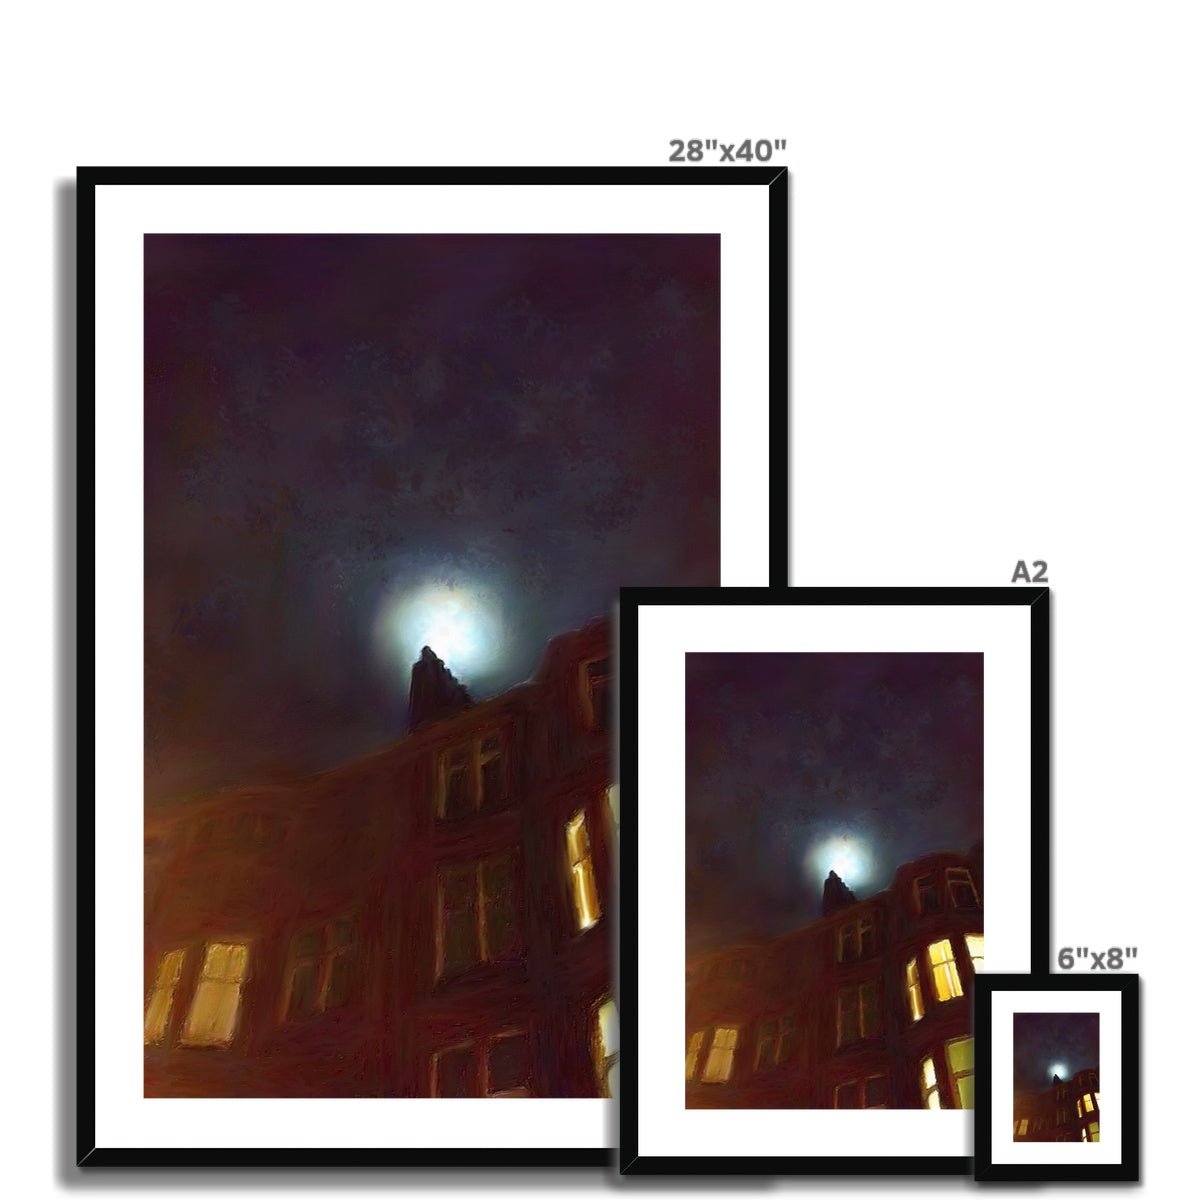 A Moonlit Tenement Painting | Framed & Mounted Prints From Scotland-Framed & Mounted Prints-Edinburgh & Glasgow Art Gallery-Paintings, Prints, Homeware, Art Gifts From Scotland By Scottish Artist Kevin Hunter